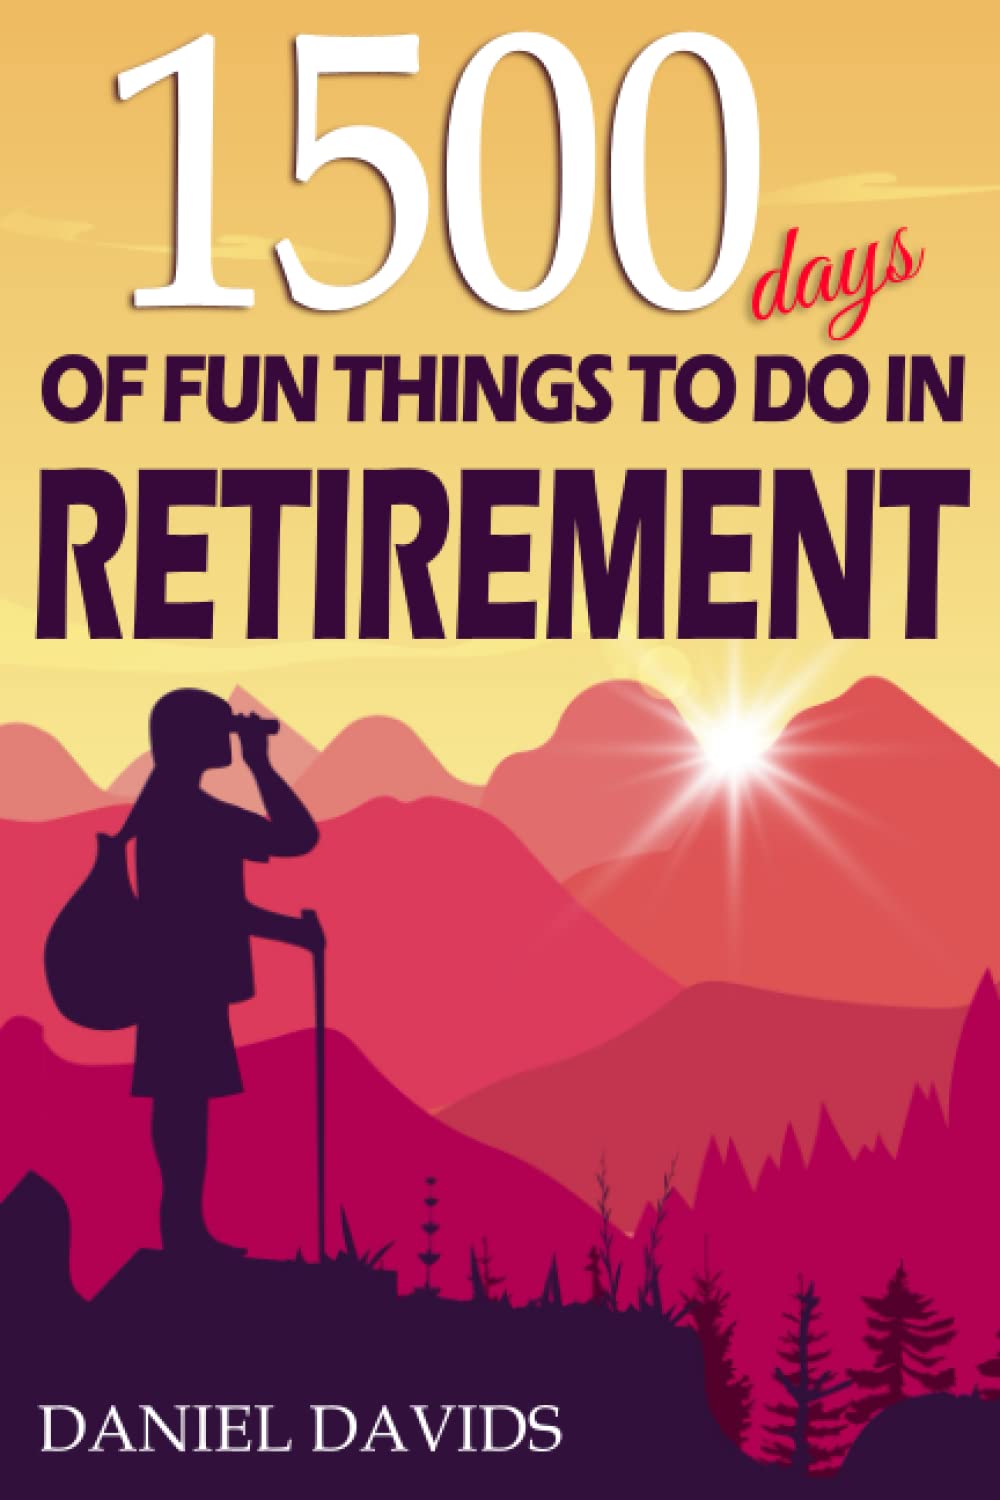 New retirees will love getting this fun and insightful retirement book as a congratulations gift for their new chapter! | The Dating Divas